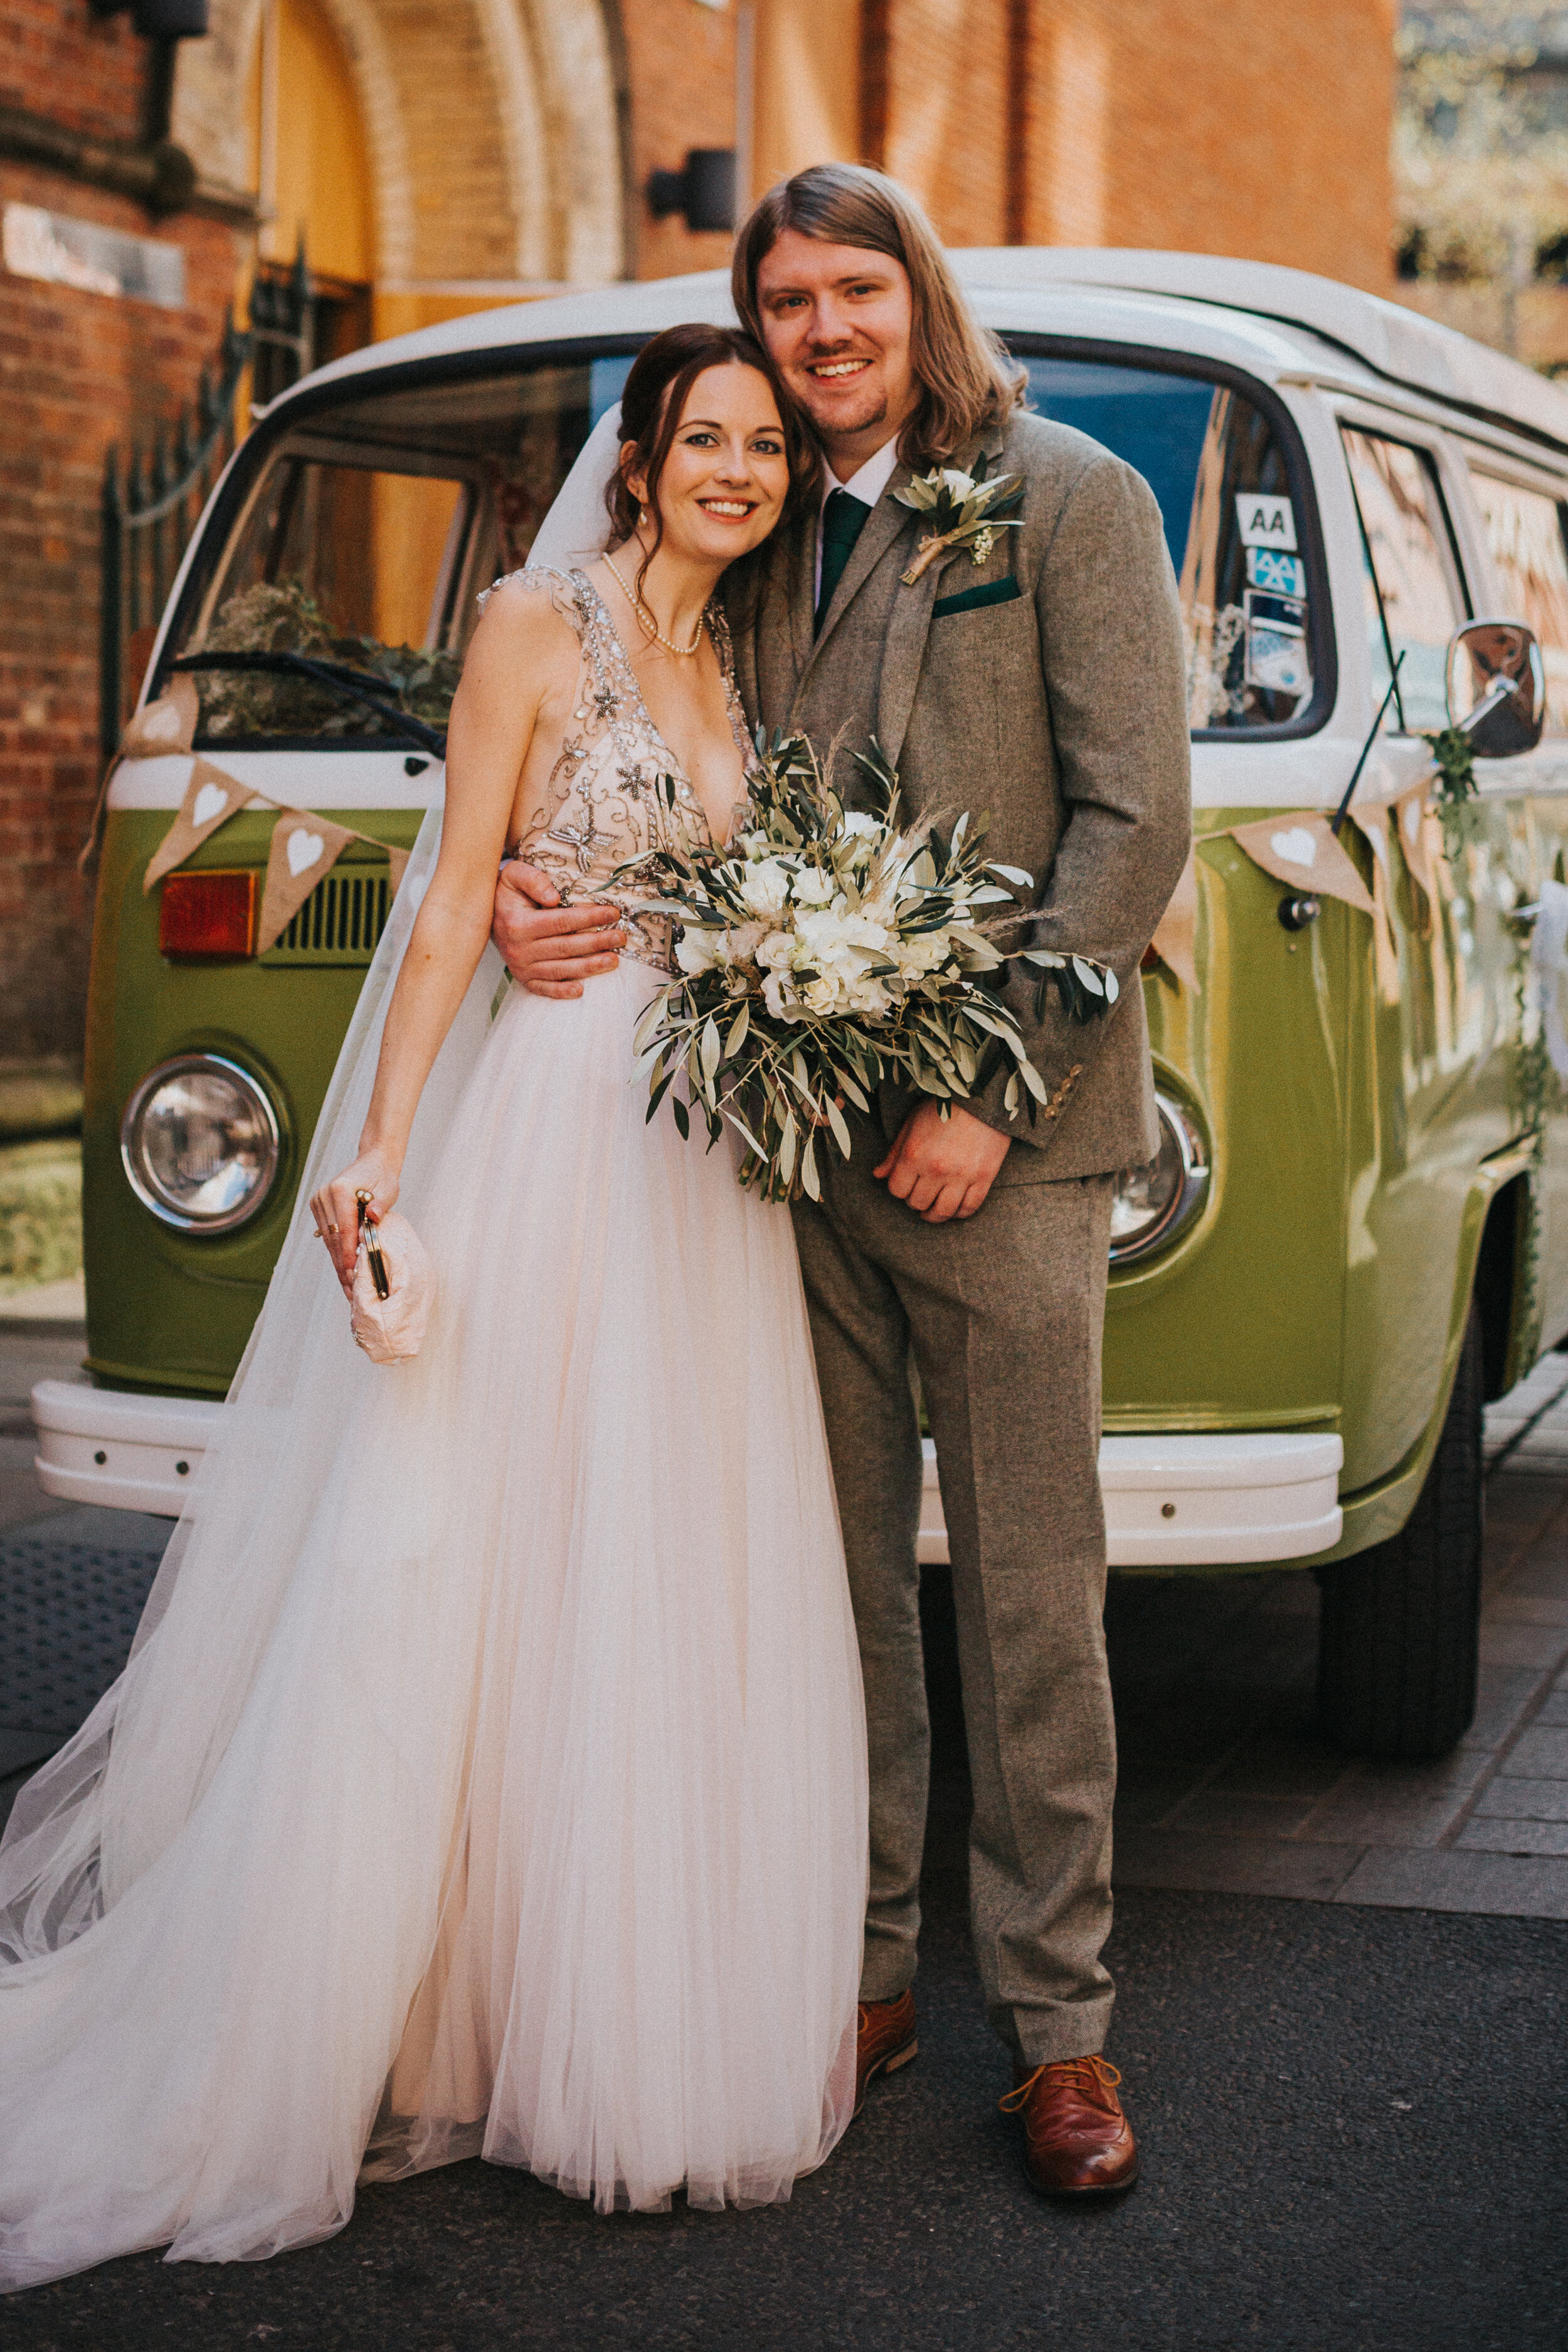 Bride and Groom stand together in front of their green VW camper van